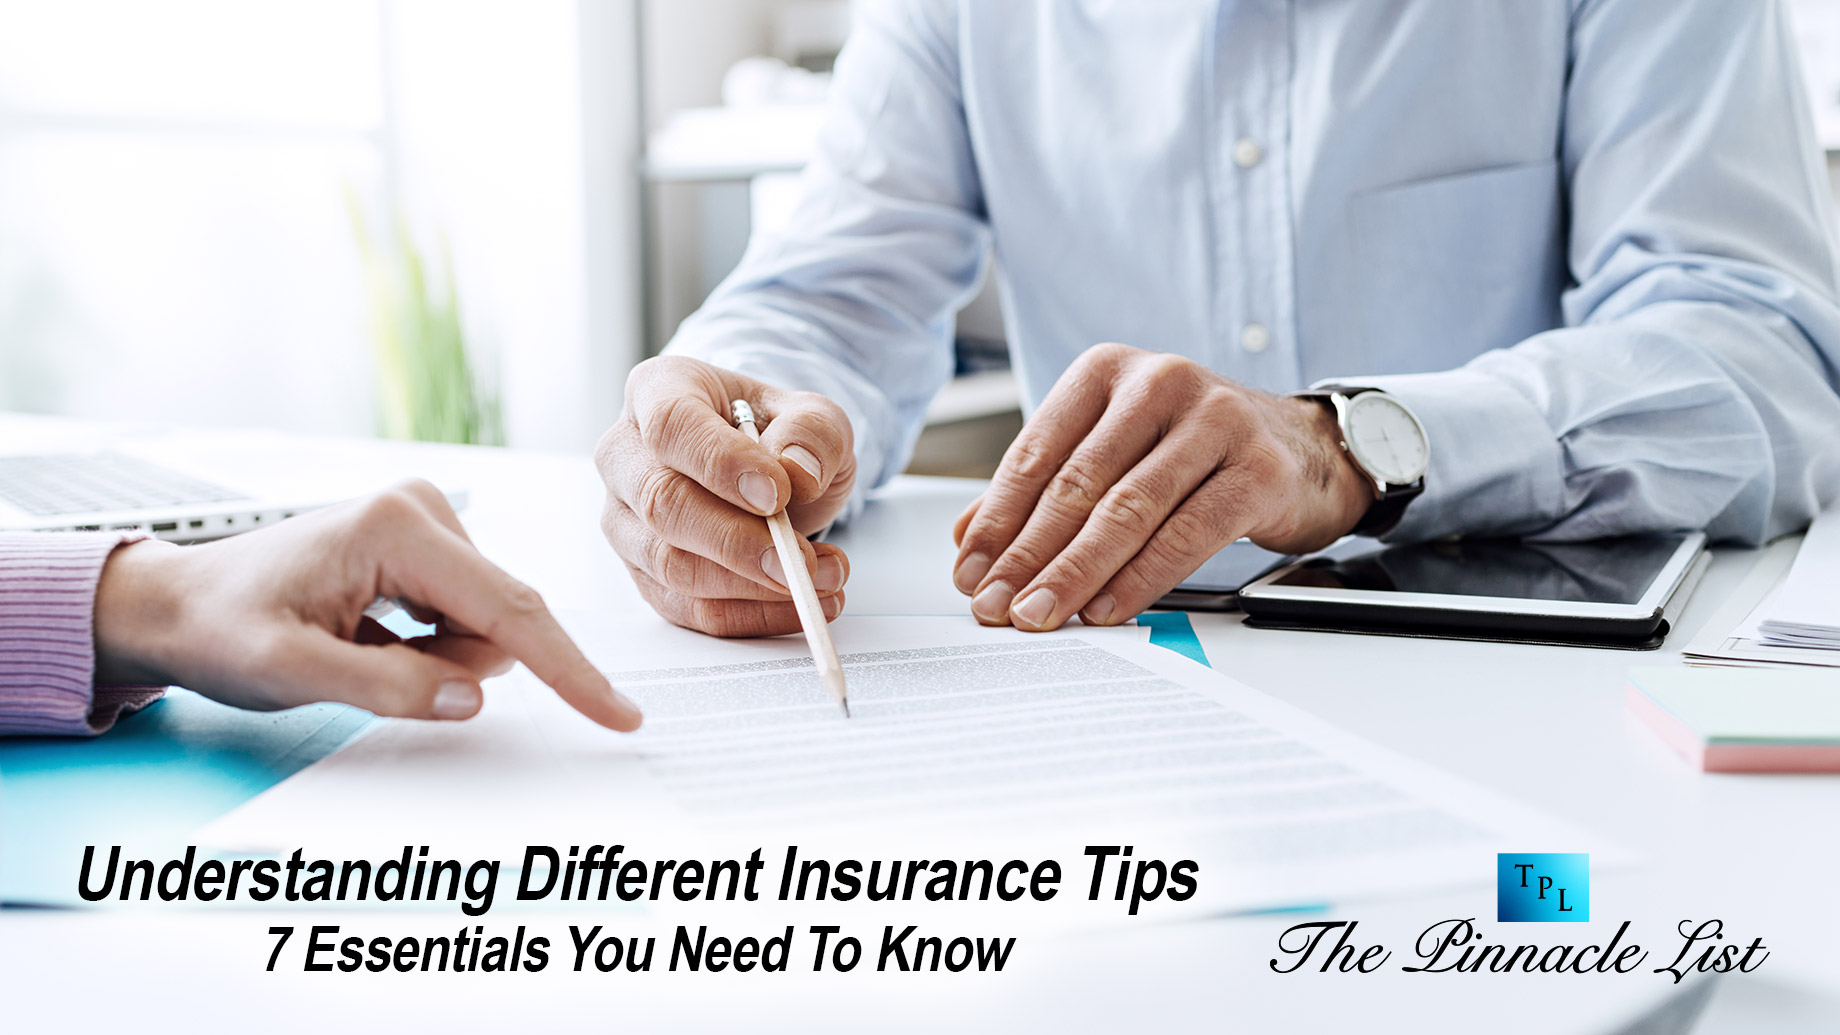 Understanding Different Insurance Tips: 7 Essentials You Need To Know